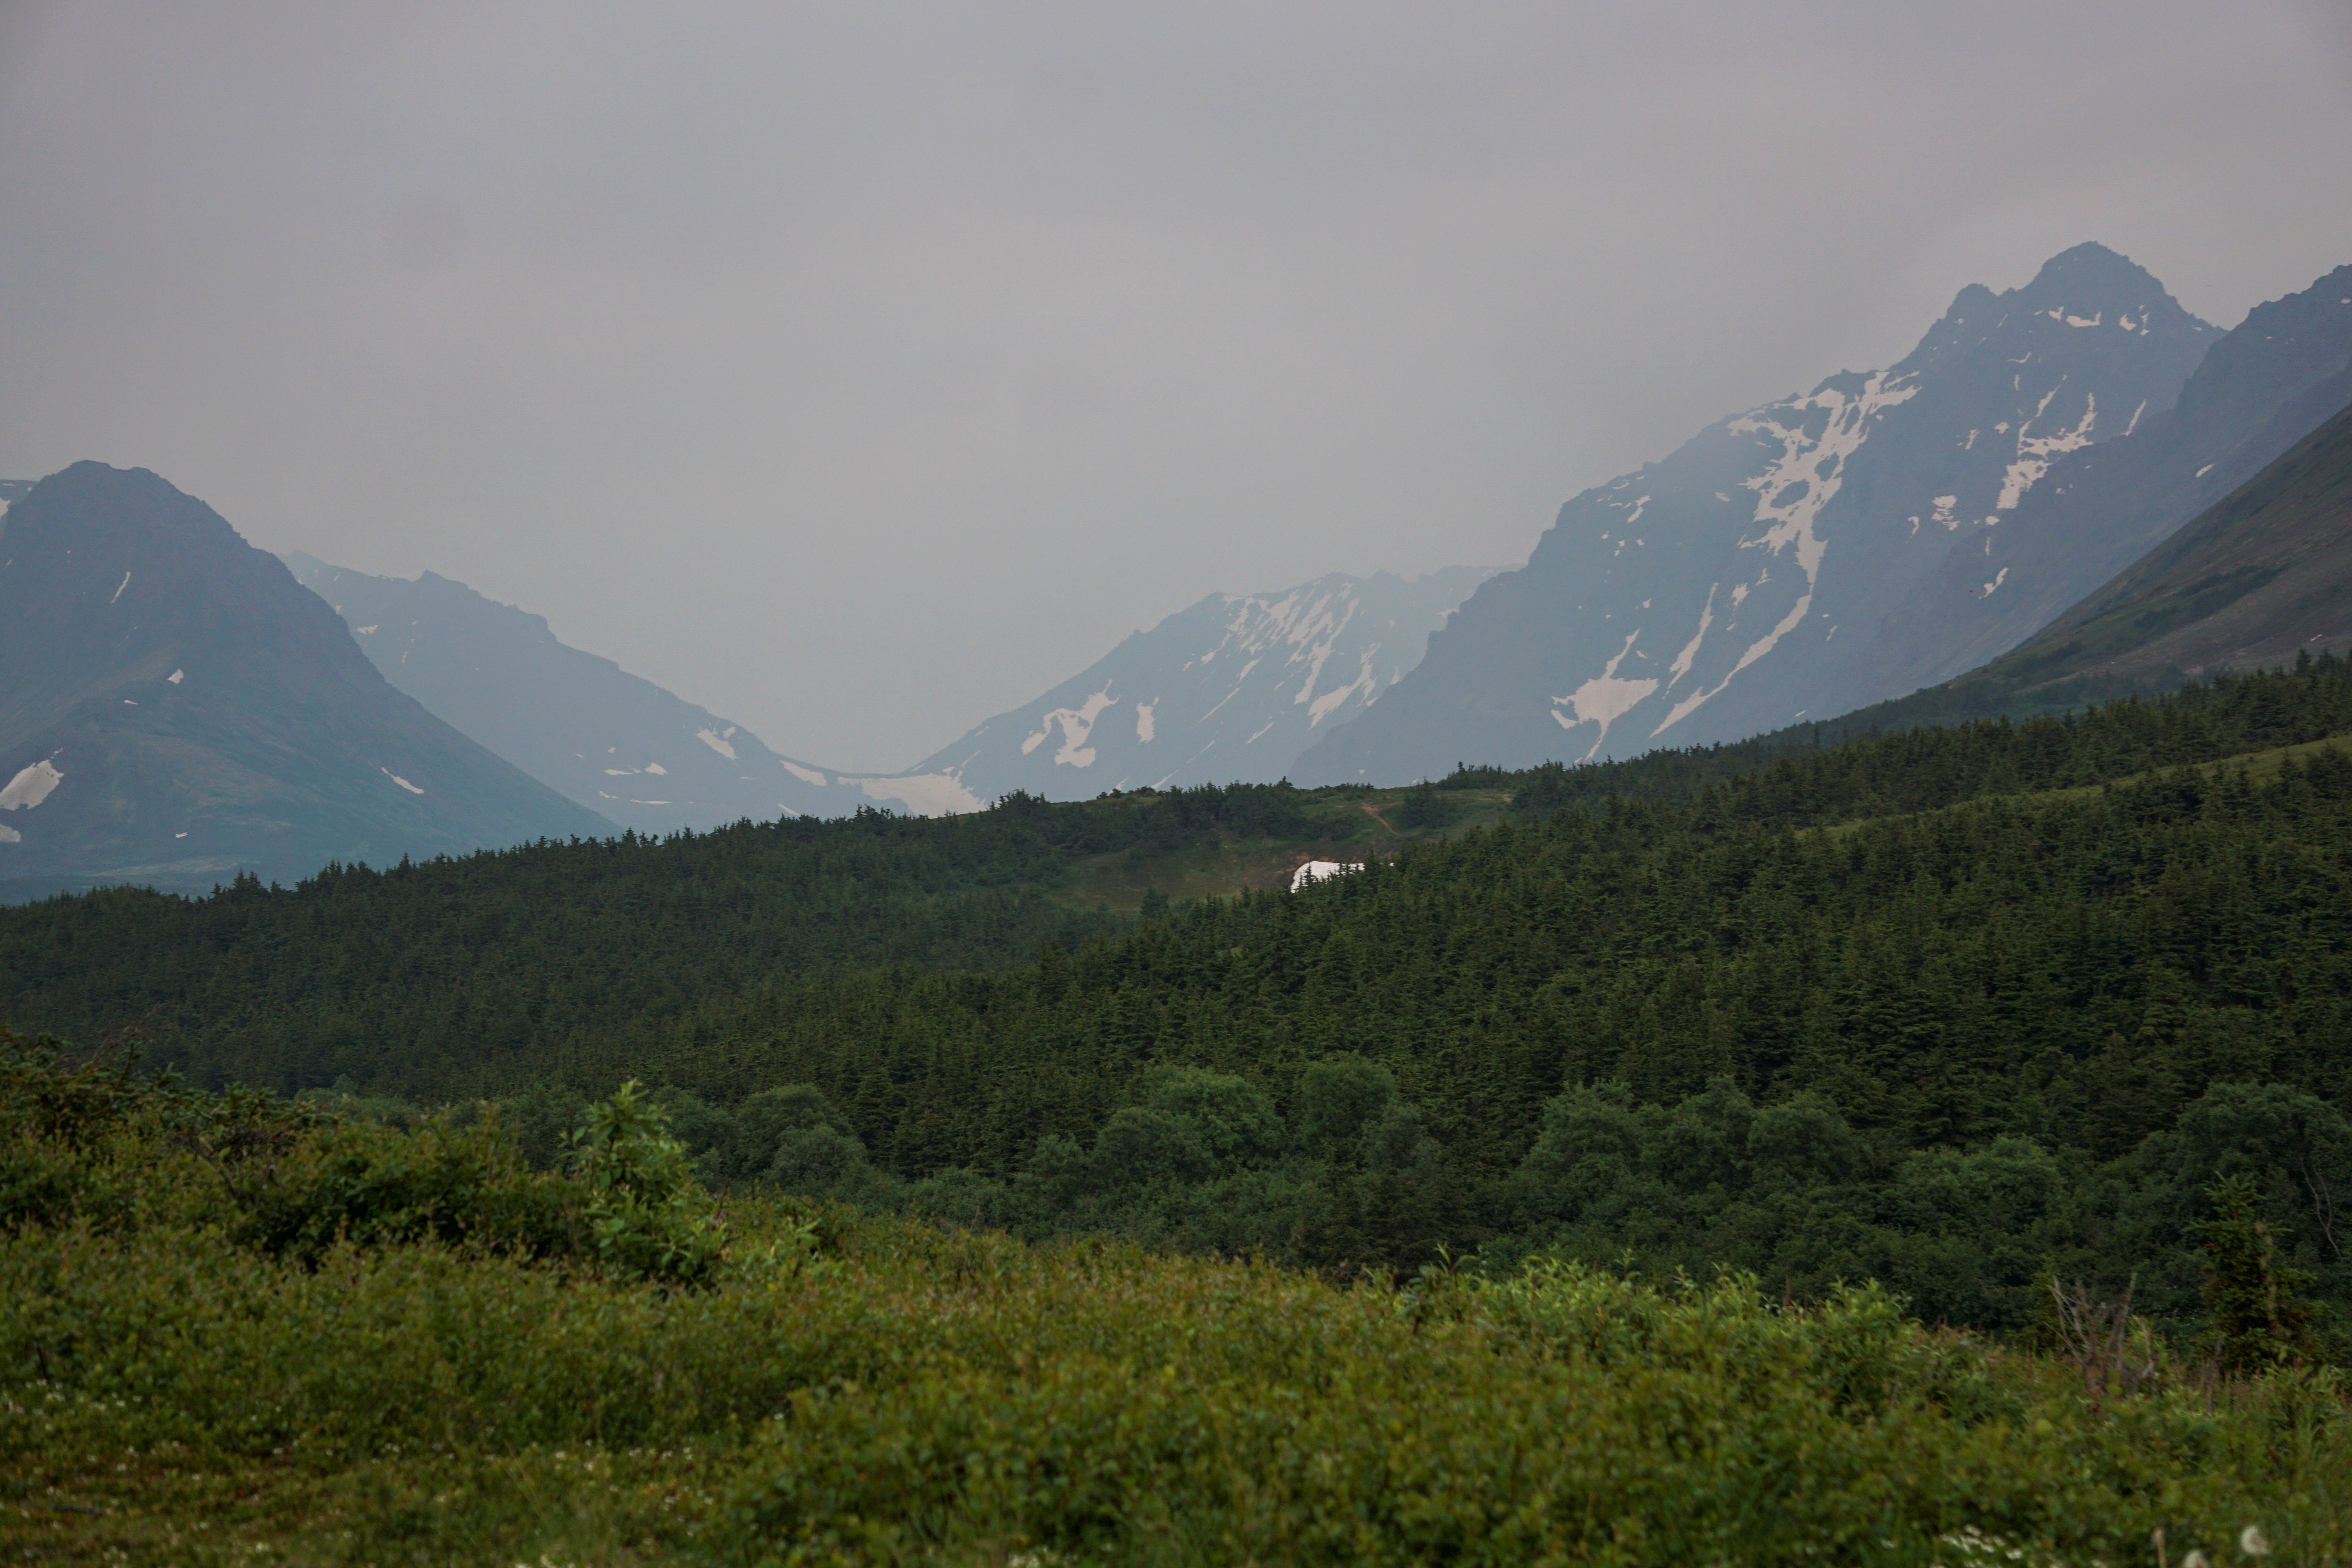 A general view of the mountain valley obscured by smoke taken from the Glen Alps trailhead of Chugach State Park in Anchorage